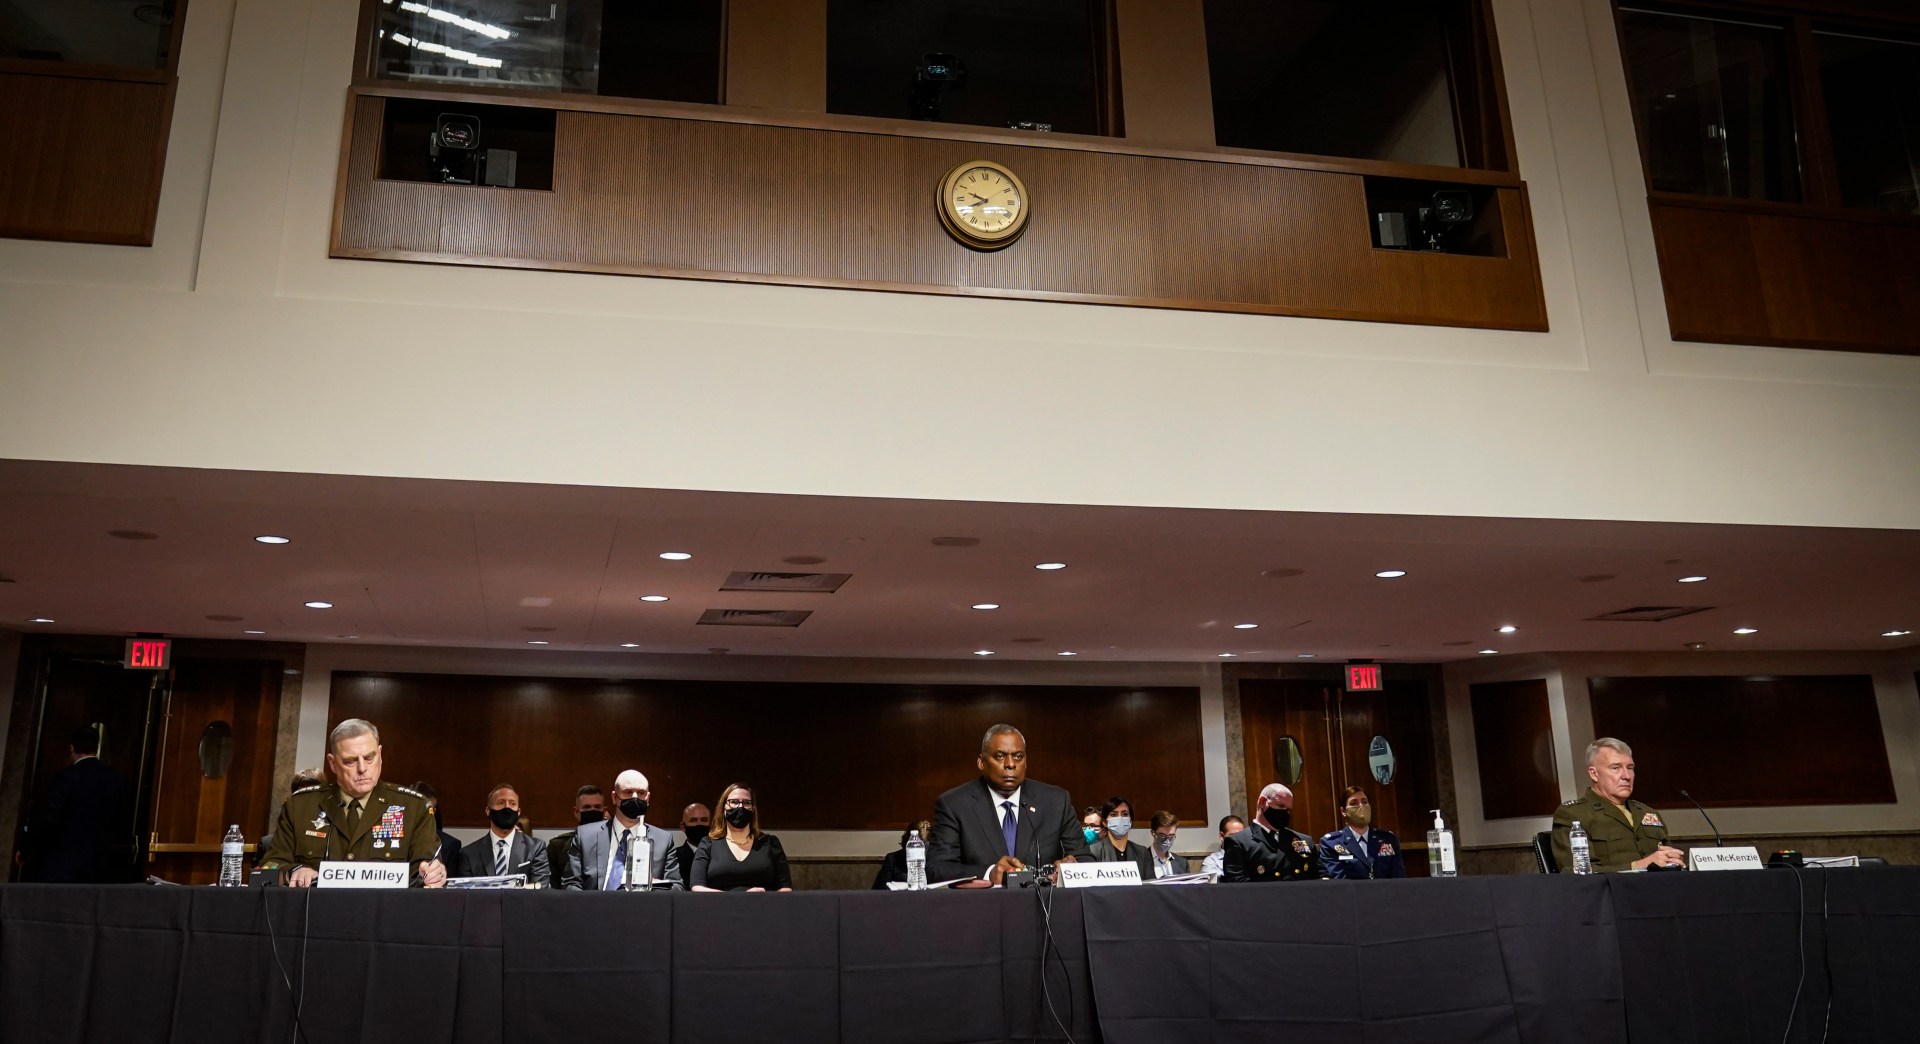 Three Pentagon officials, Defense Secretary Lloyd Austin, Joint Chiefs of Staff Chairman Gen. Mark Milley, and head of the Central Command Gen. Frank McKenzie, testified on Afghanistan and China.